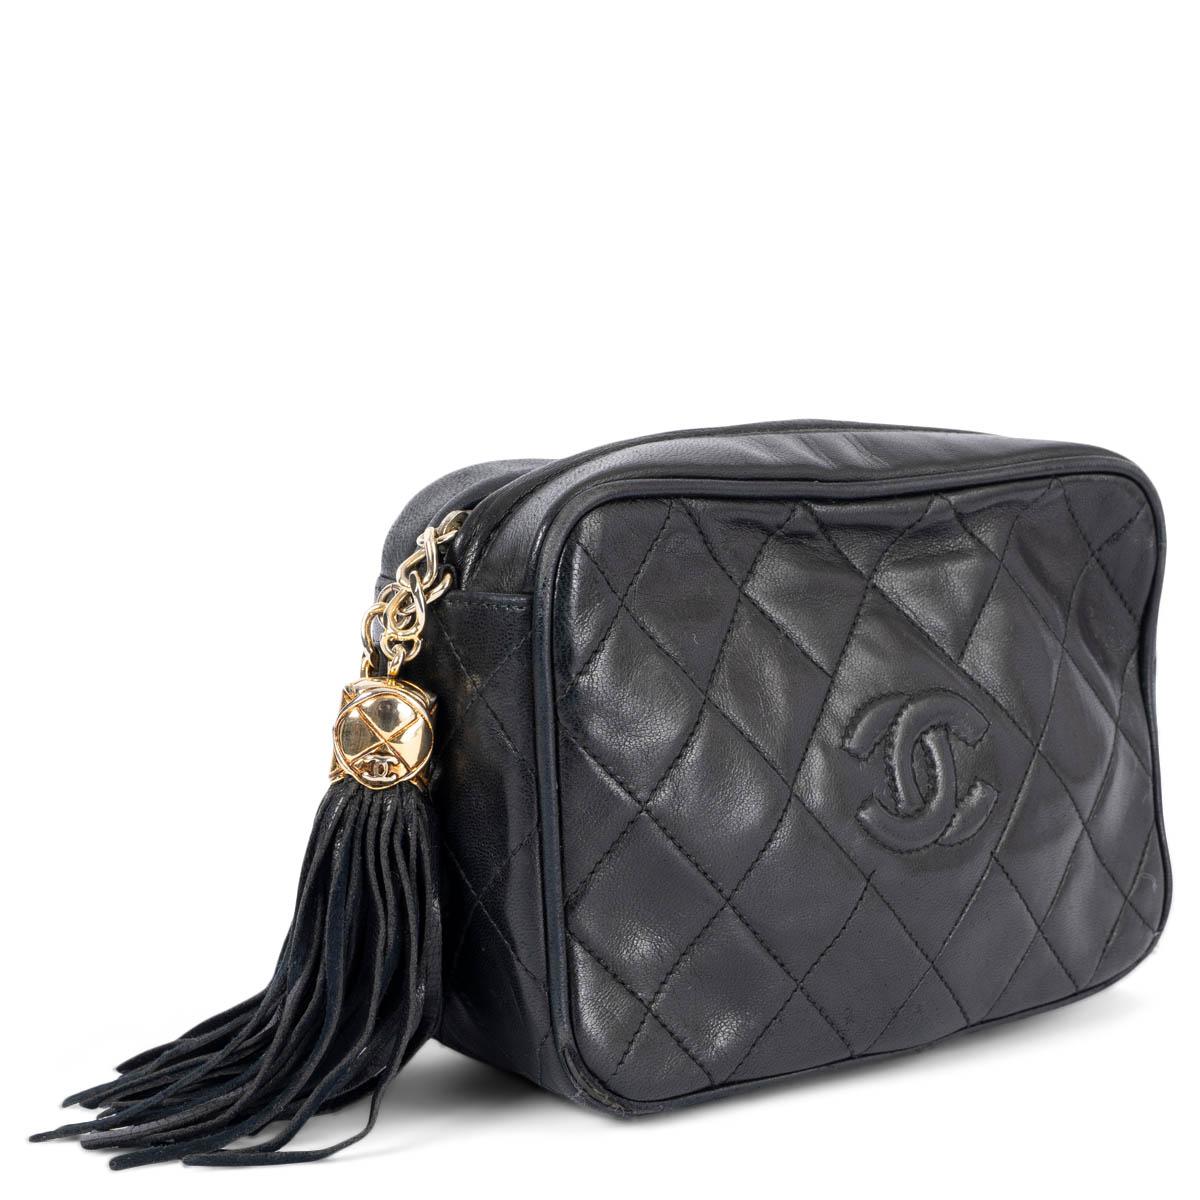 100% authentic Chanel quilted front logo tassel camera shoulder bag in black smooth lambskin featuring gold-tone hardware. Opens with a tassel zipper on top and is lined in black leather with one zipper pocket against the back. Has been carried and